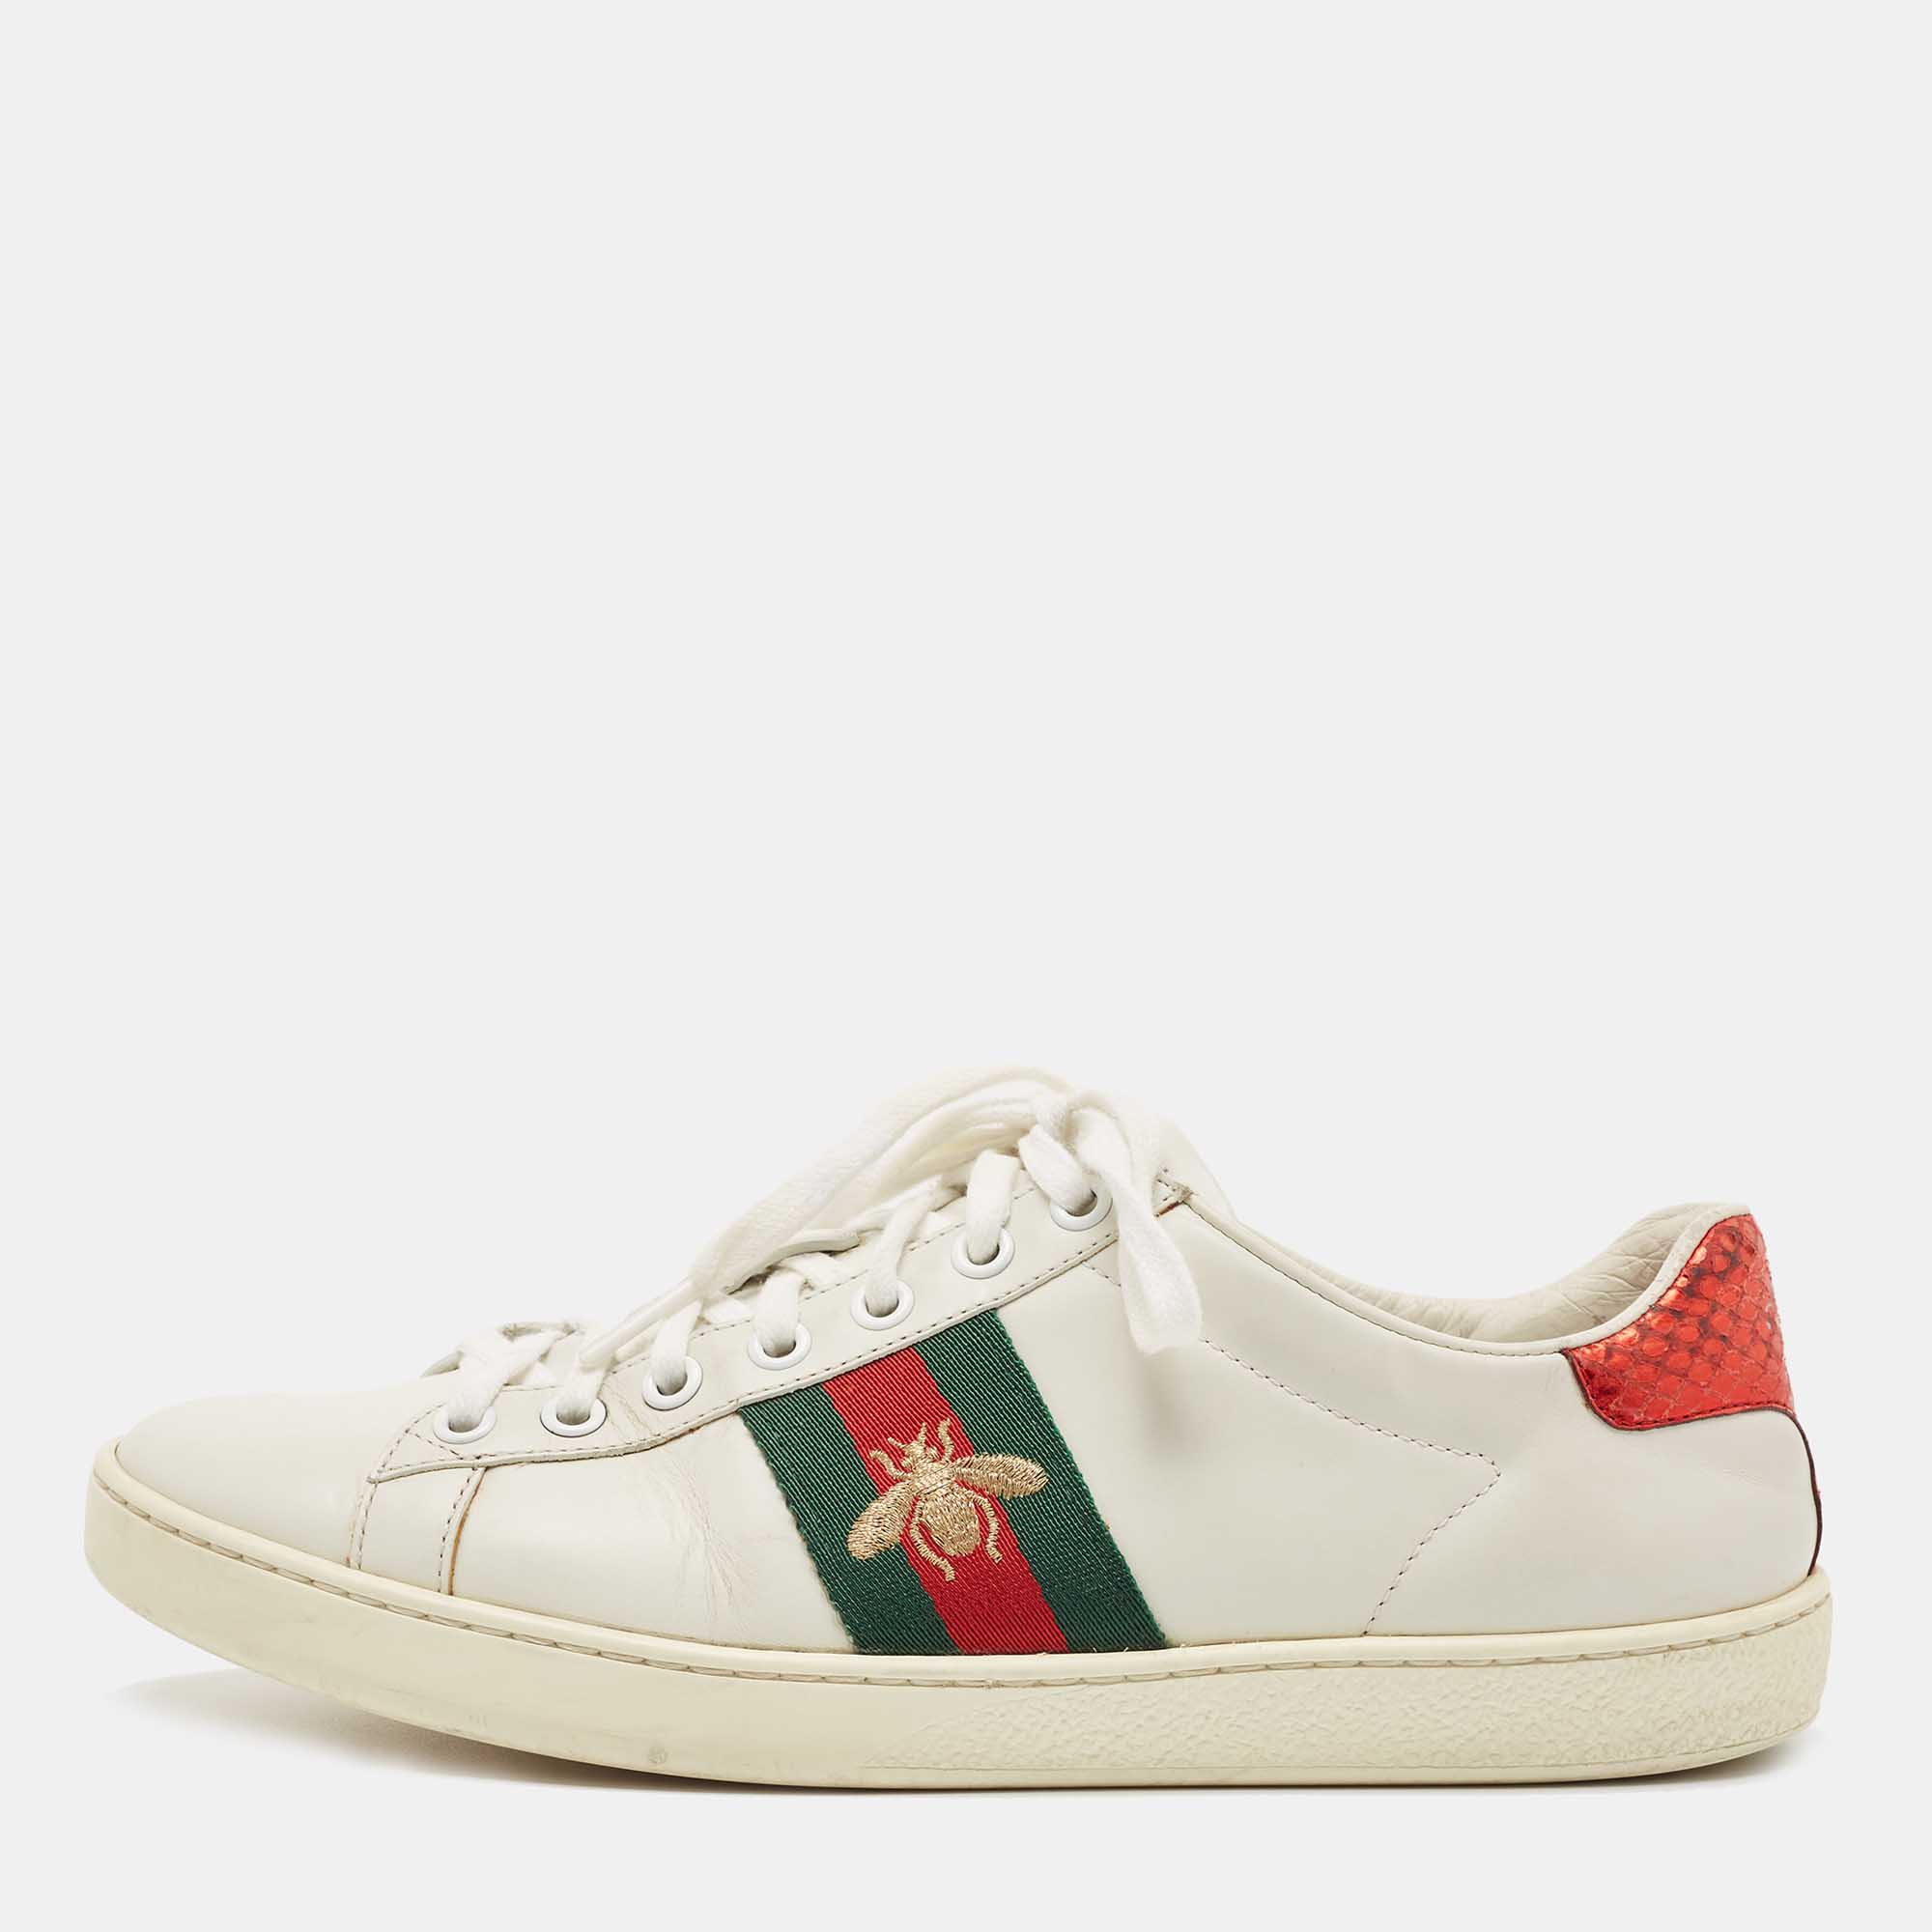 Pre-owned Gucci White Leather Embroidered Bee Ace Sneakers Size 37.5